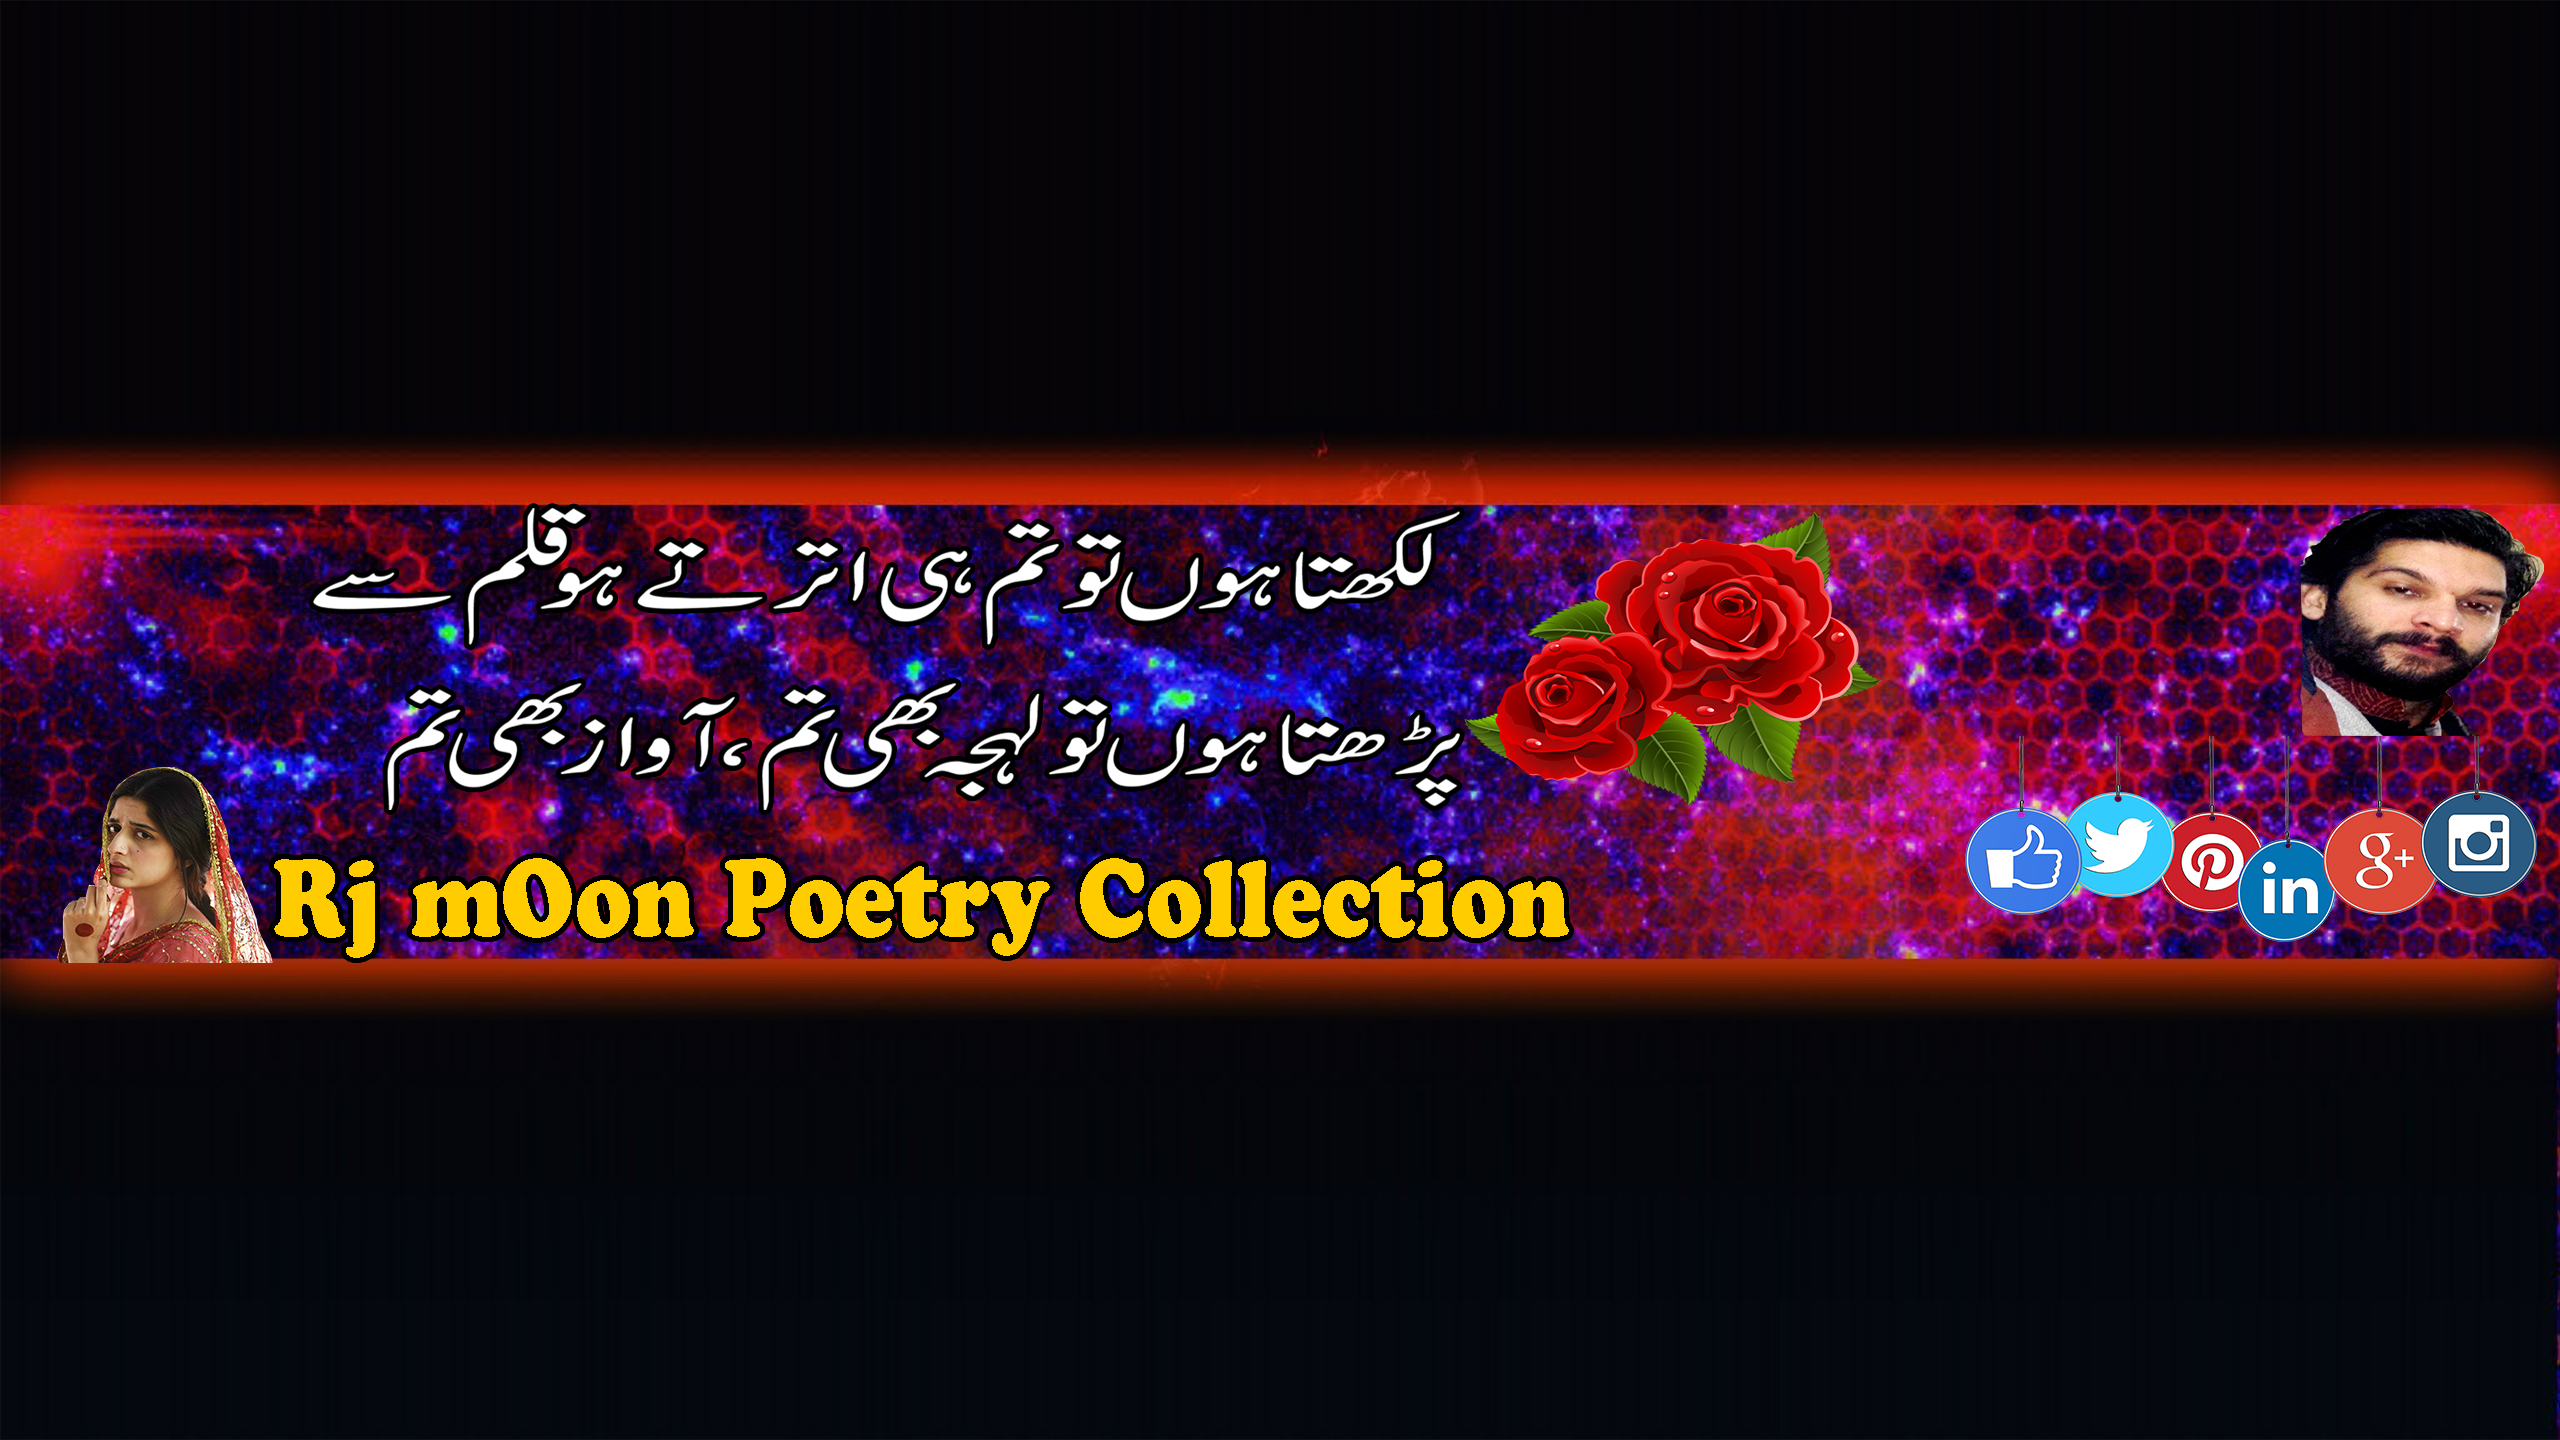 Rj moon Poetry Collection